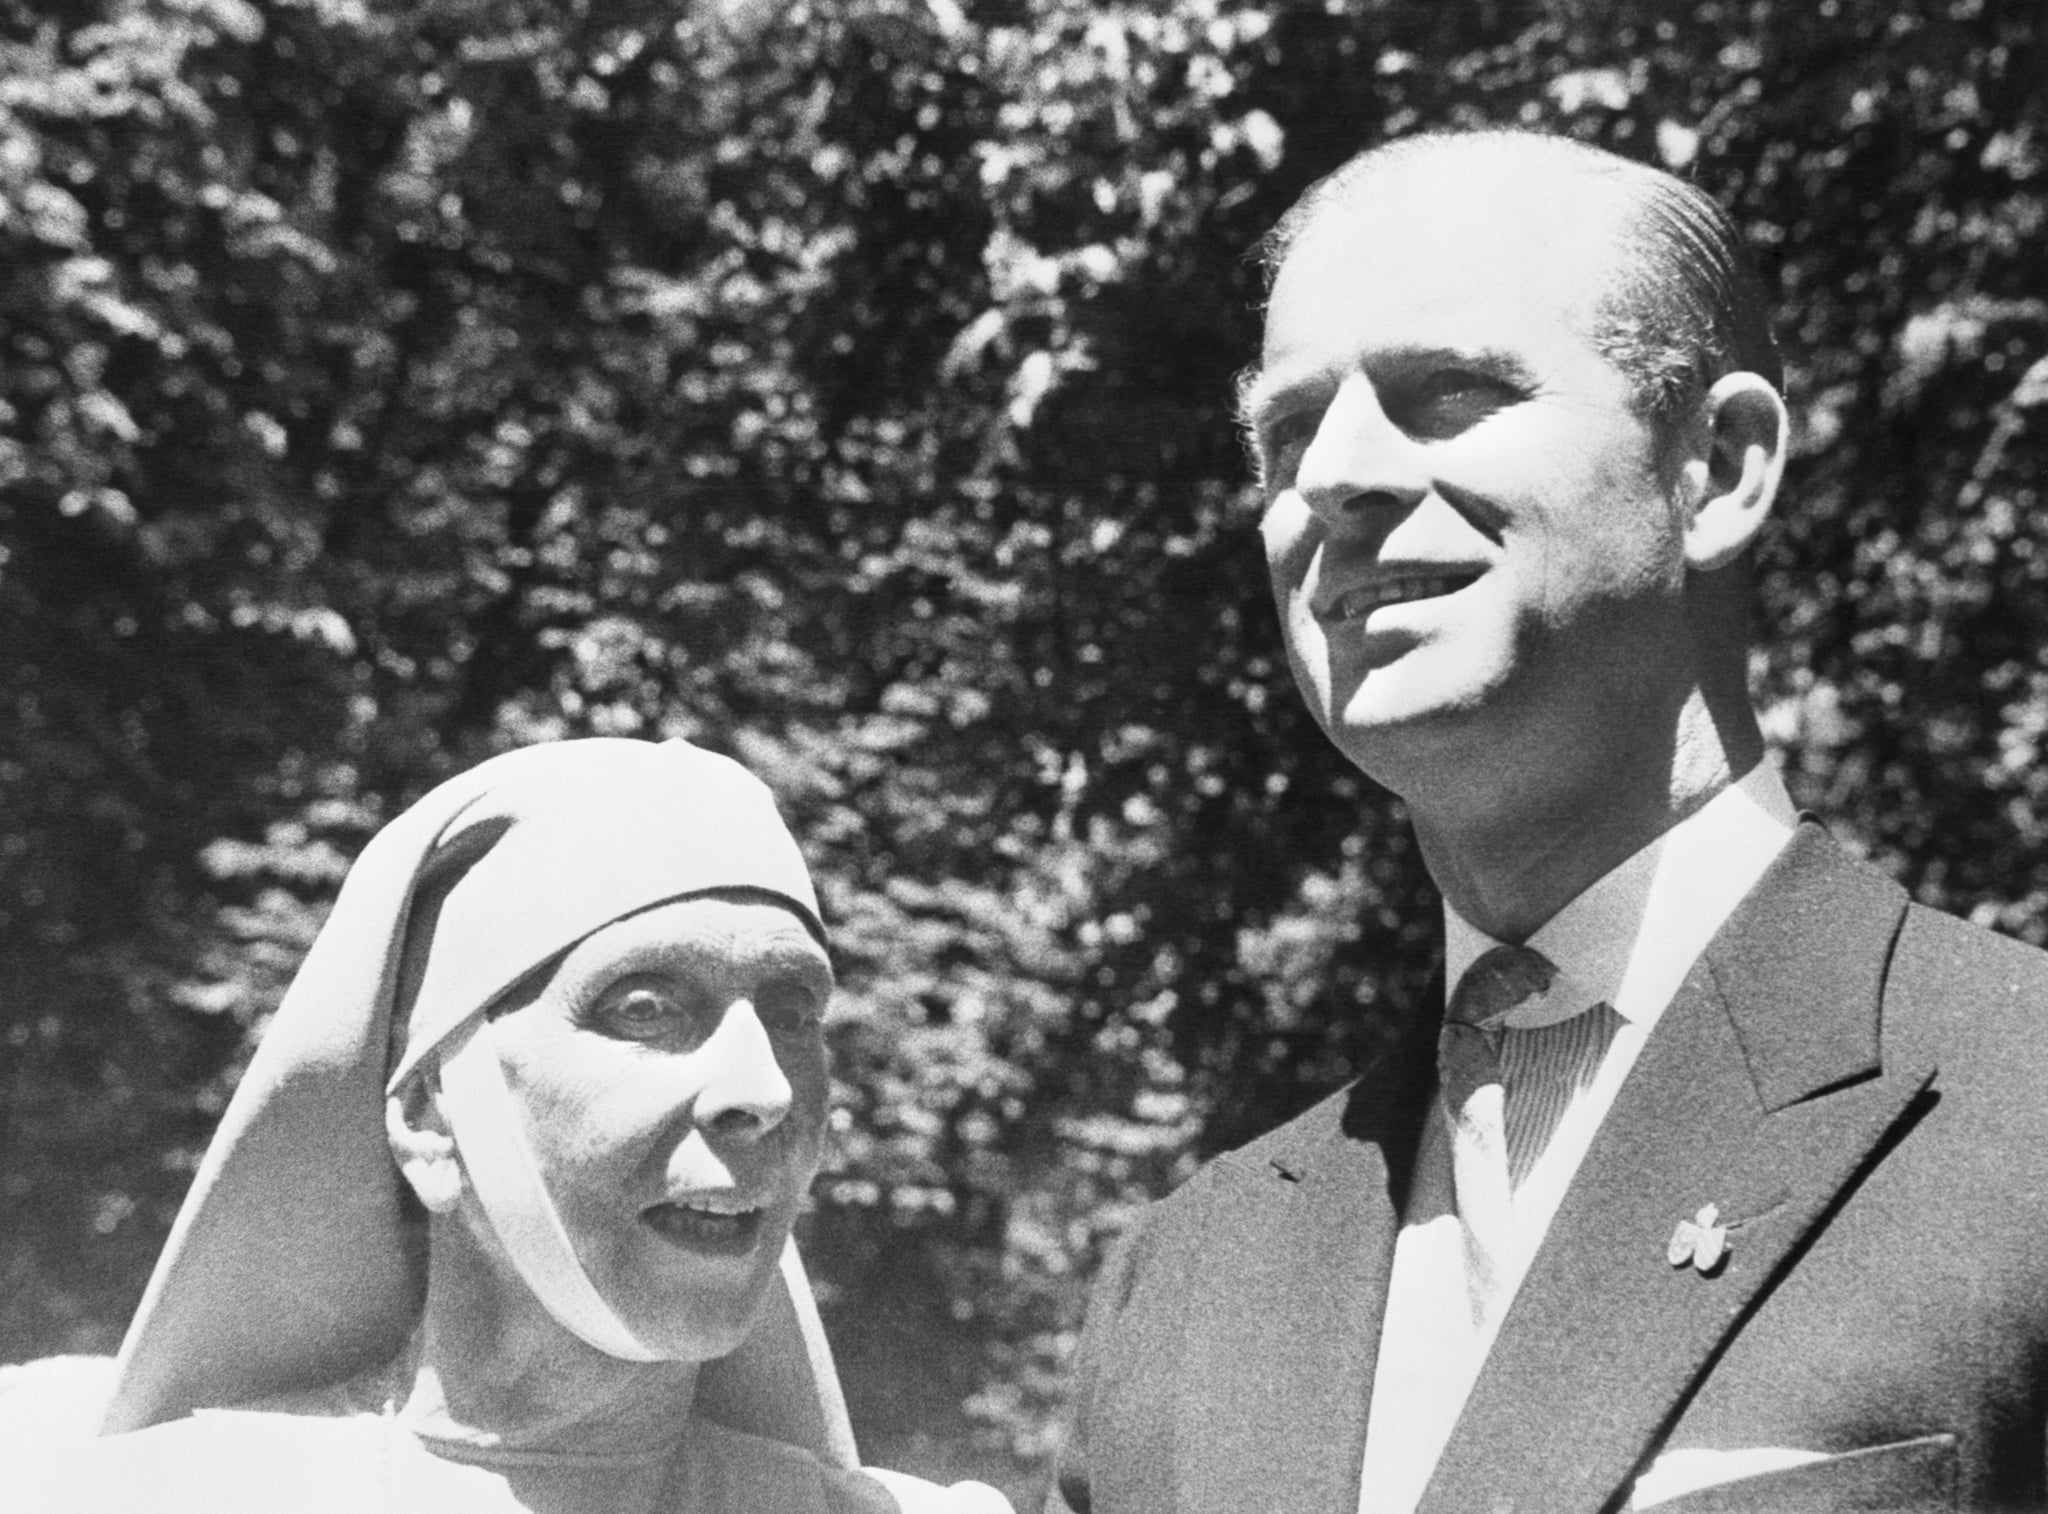 Prince Philip, Duke of Edinburgh, husband of Britain's Queen Elizabeth II, is shown in a reunion with his mother, Princess Alice of Greece. They met when both attended the marriage of Princess Margeritha of Baden and Prince Tomislavof Yugoslavia. The wedding was performed in Salem Castle, seat off the House of Baden, near Lake Constance, last week. Princess Alice, widow of Prince Andrew of Greece is living a semi-cloistered life as a nun on the Aegean Island of Tinos, where she has formed an order of deaconesses. She wears a habit similar to that of the Greek Orthodox religious orders.